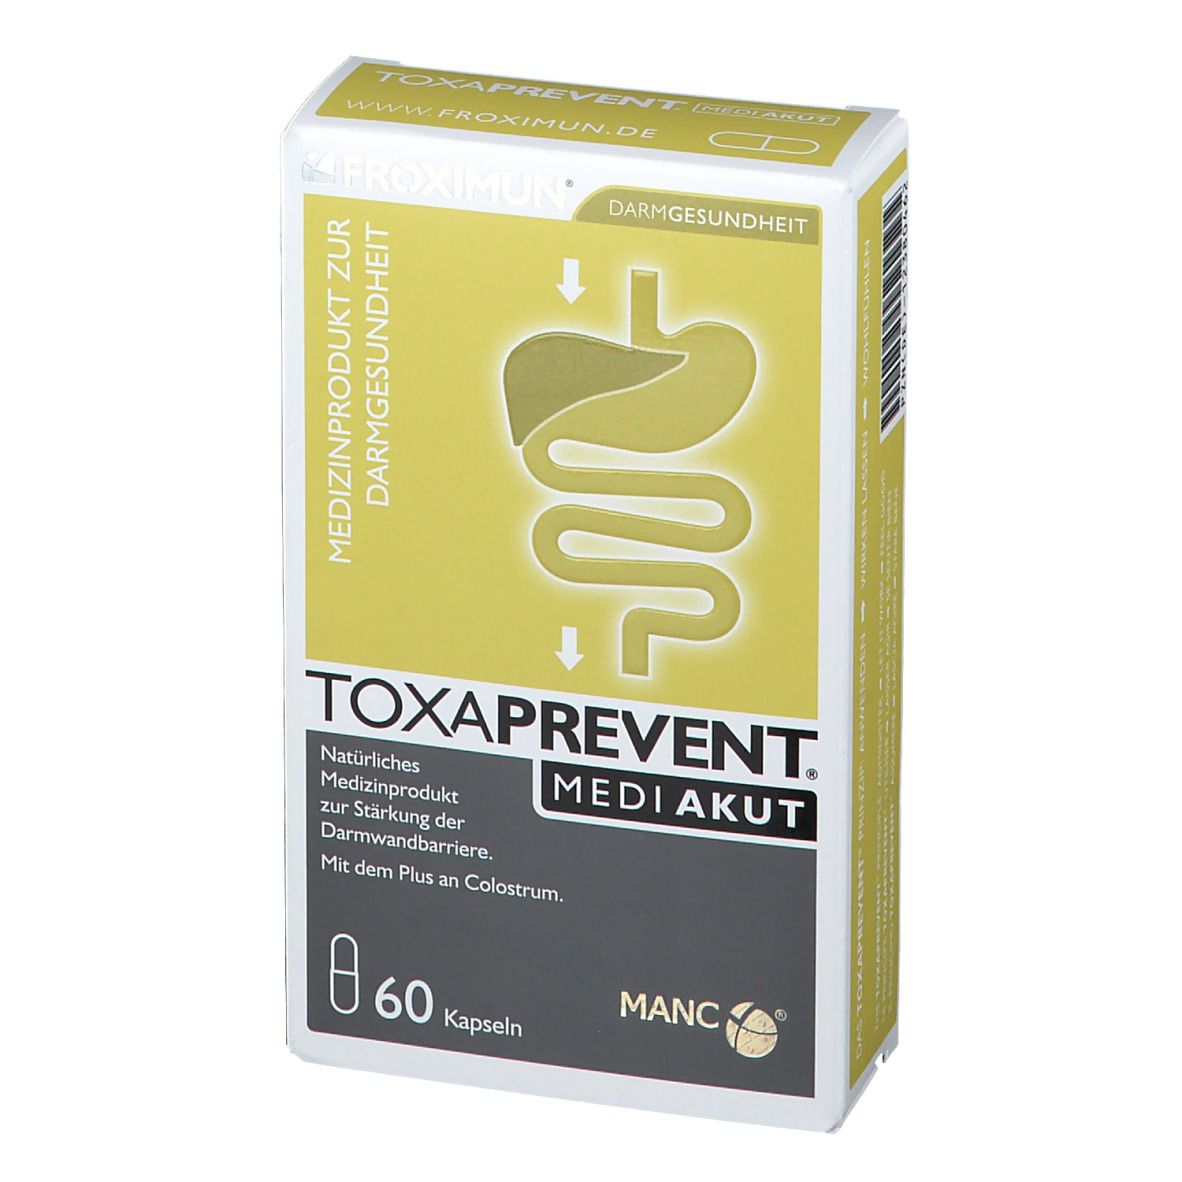 TOXASCREEN® Toxaprevent medi Akut